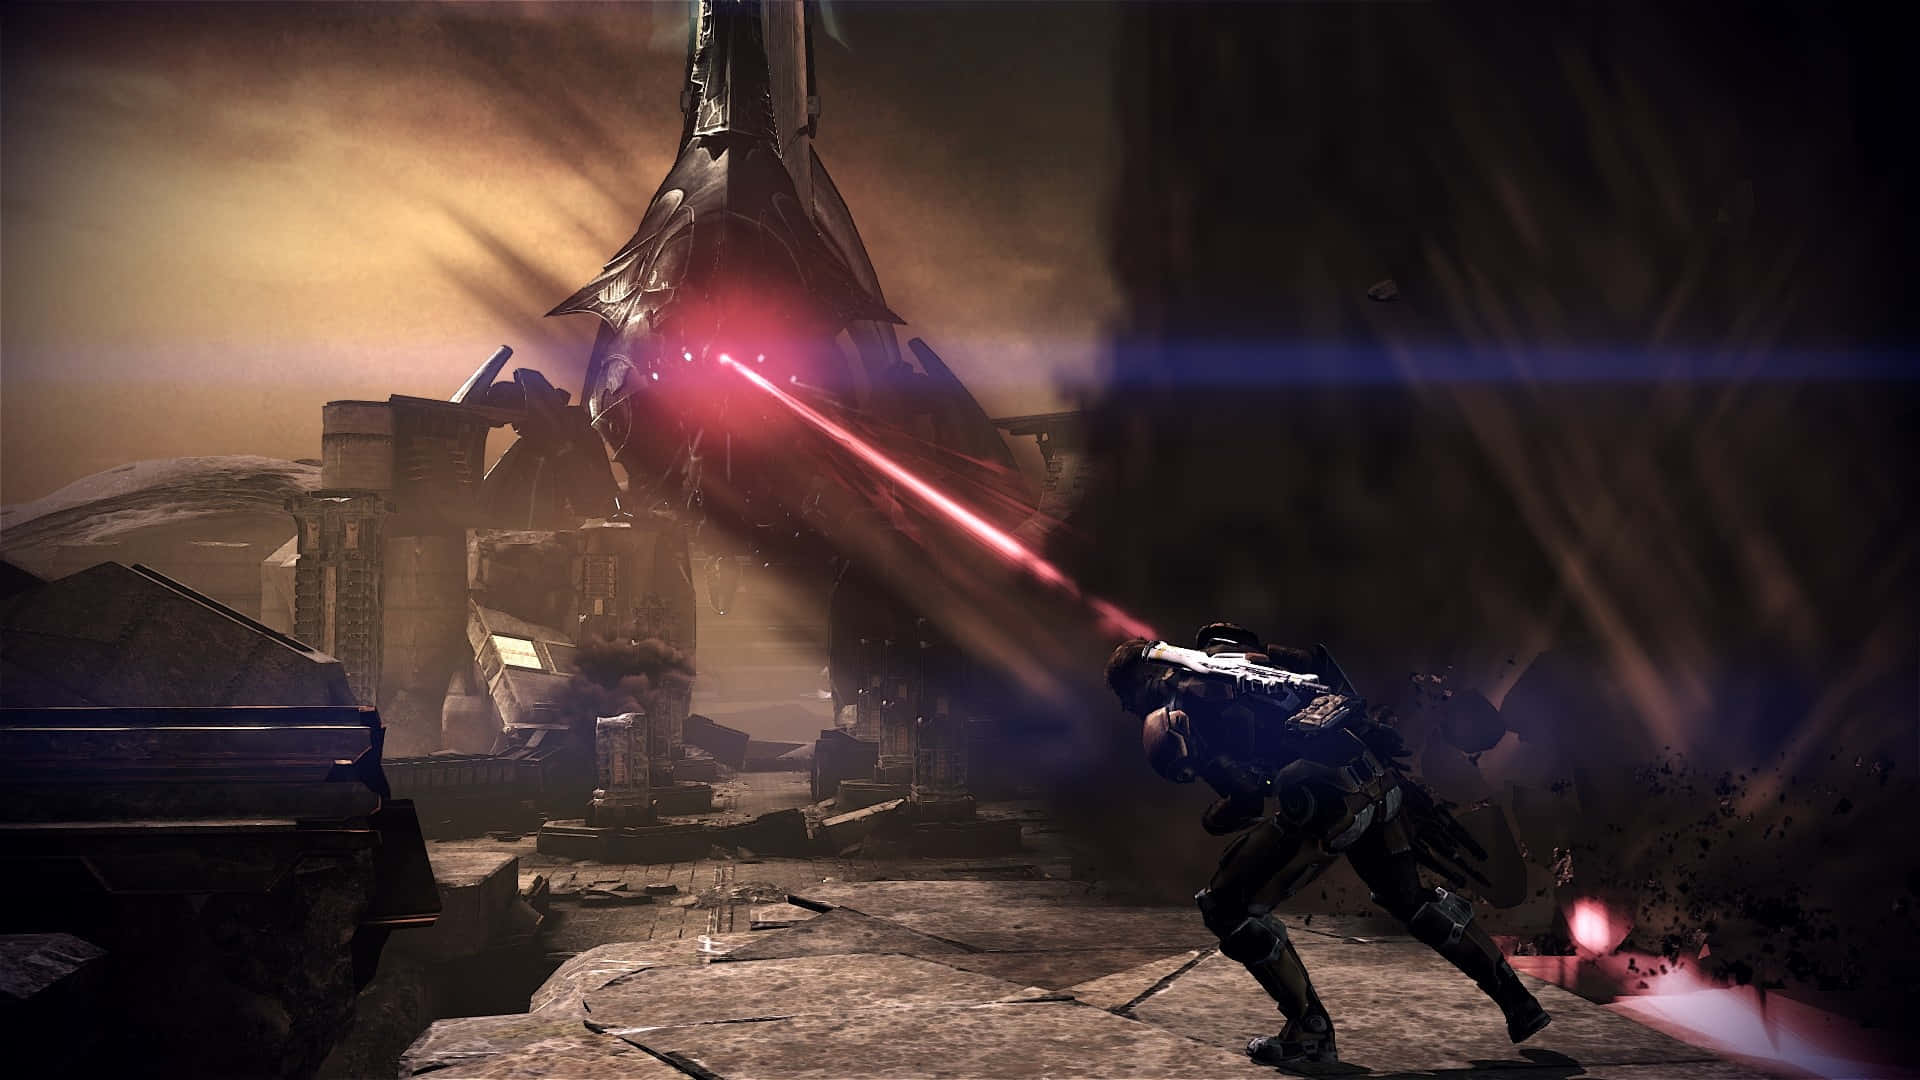 Majestic Mass Effect 3 Reaper In Action Wallpaper